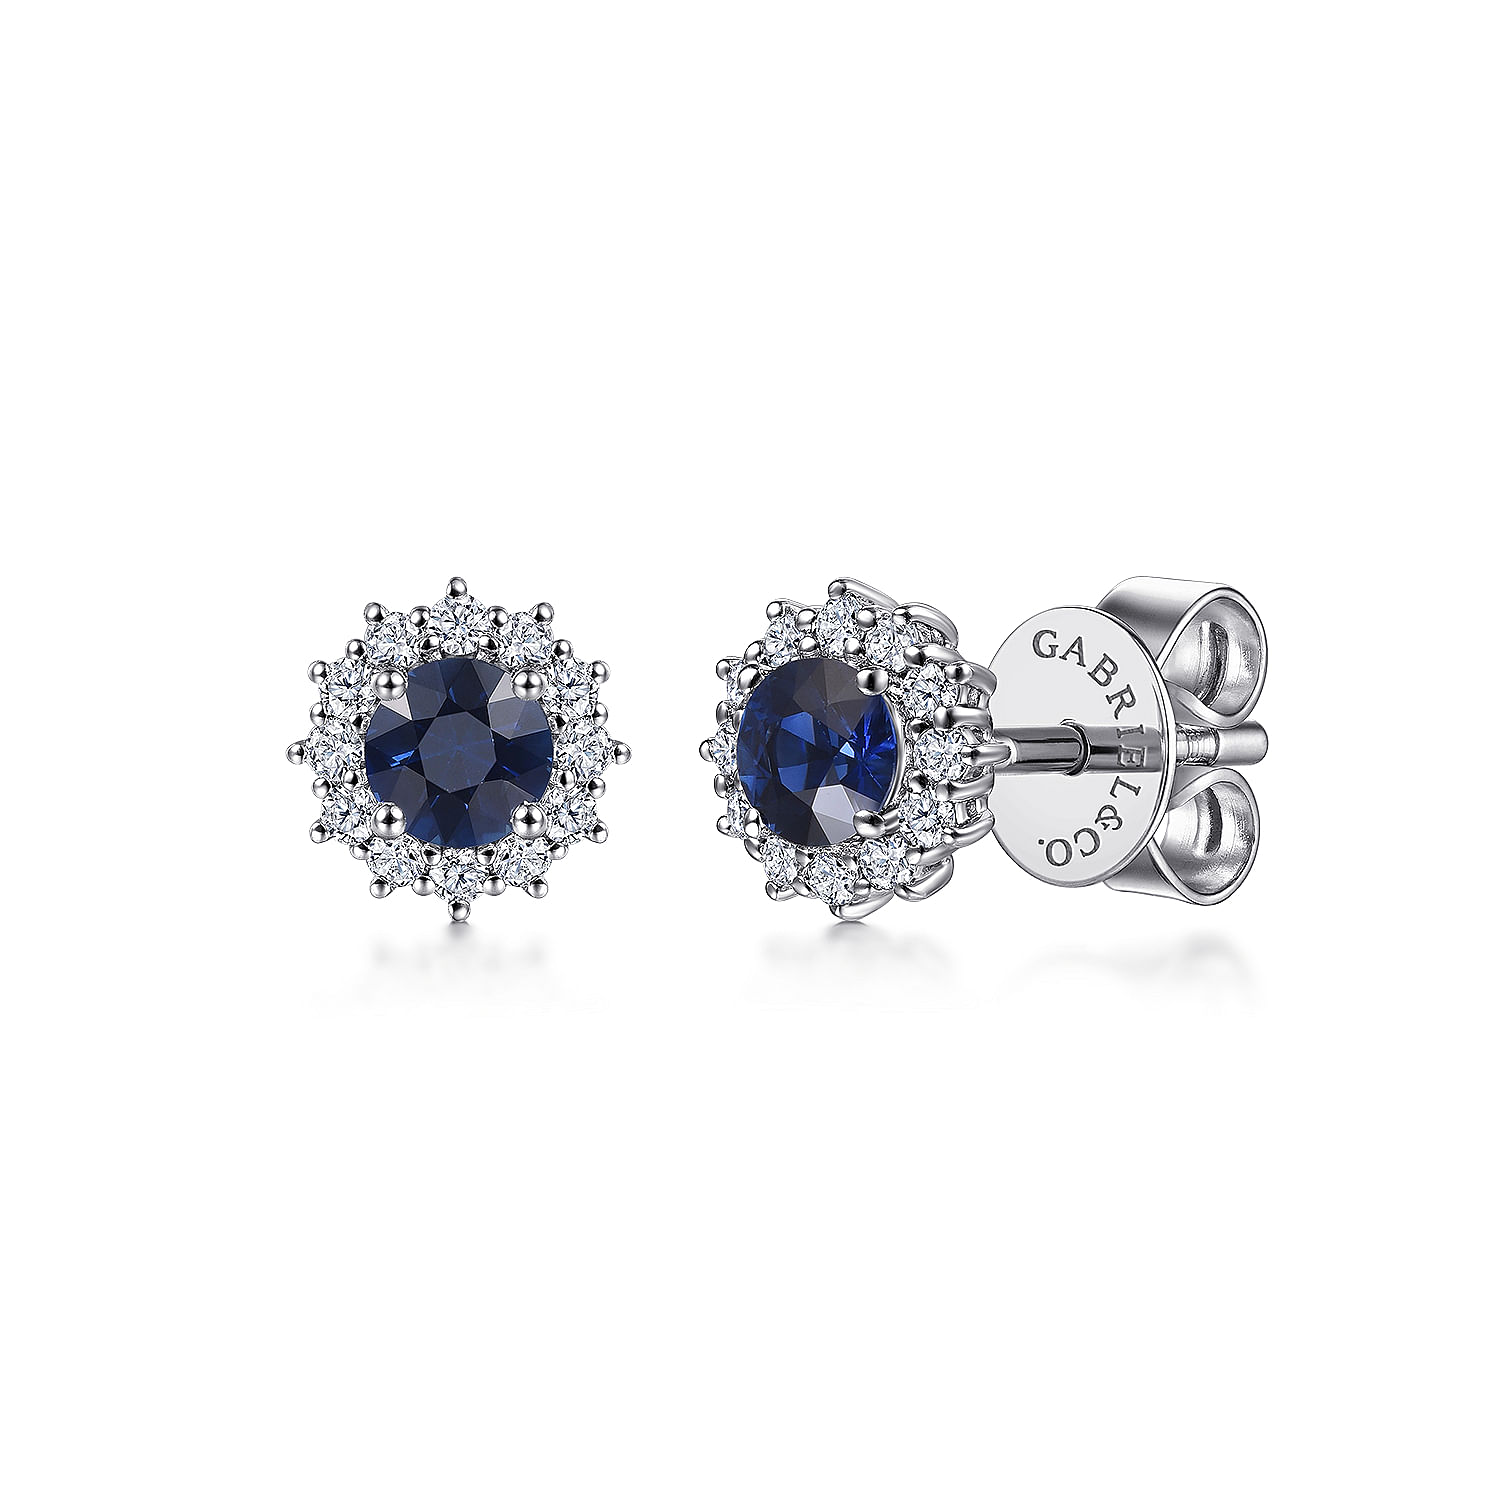 Gabriel - 14K White Gold Round Sapphire and Diamond Halo Stud Earrings